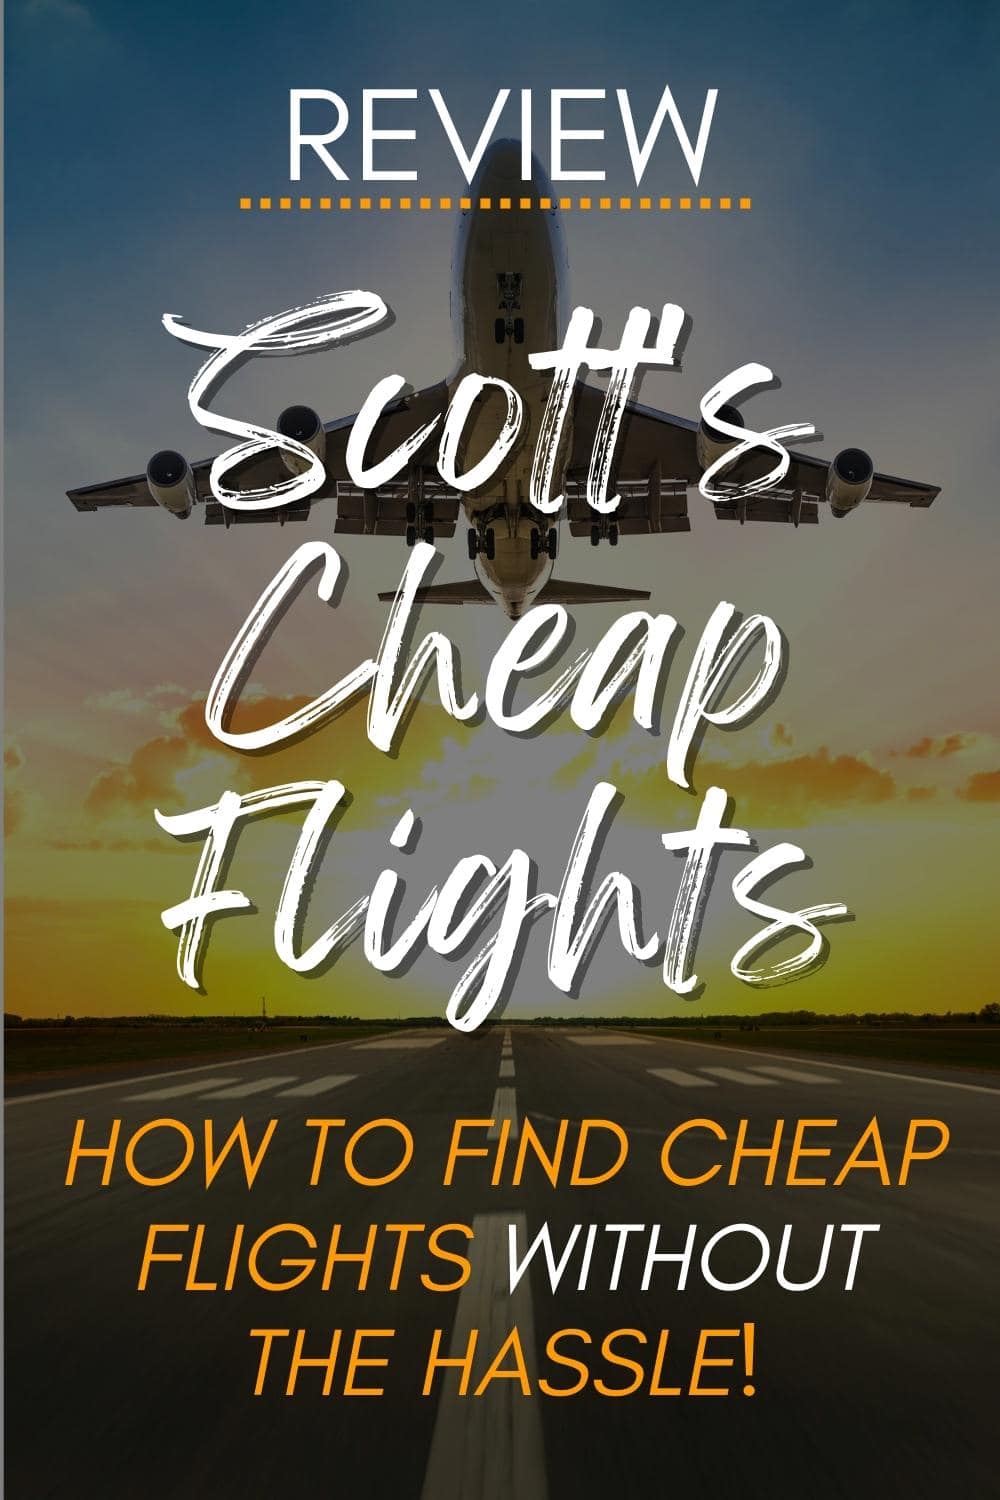 Going (formerly Scott’s Cheap Flights) Review: How to Get Amazing Deals on Airfare the Easy Way